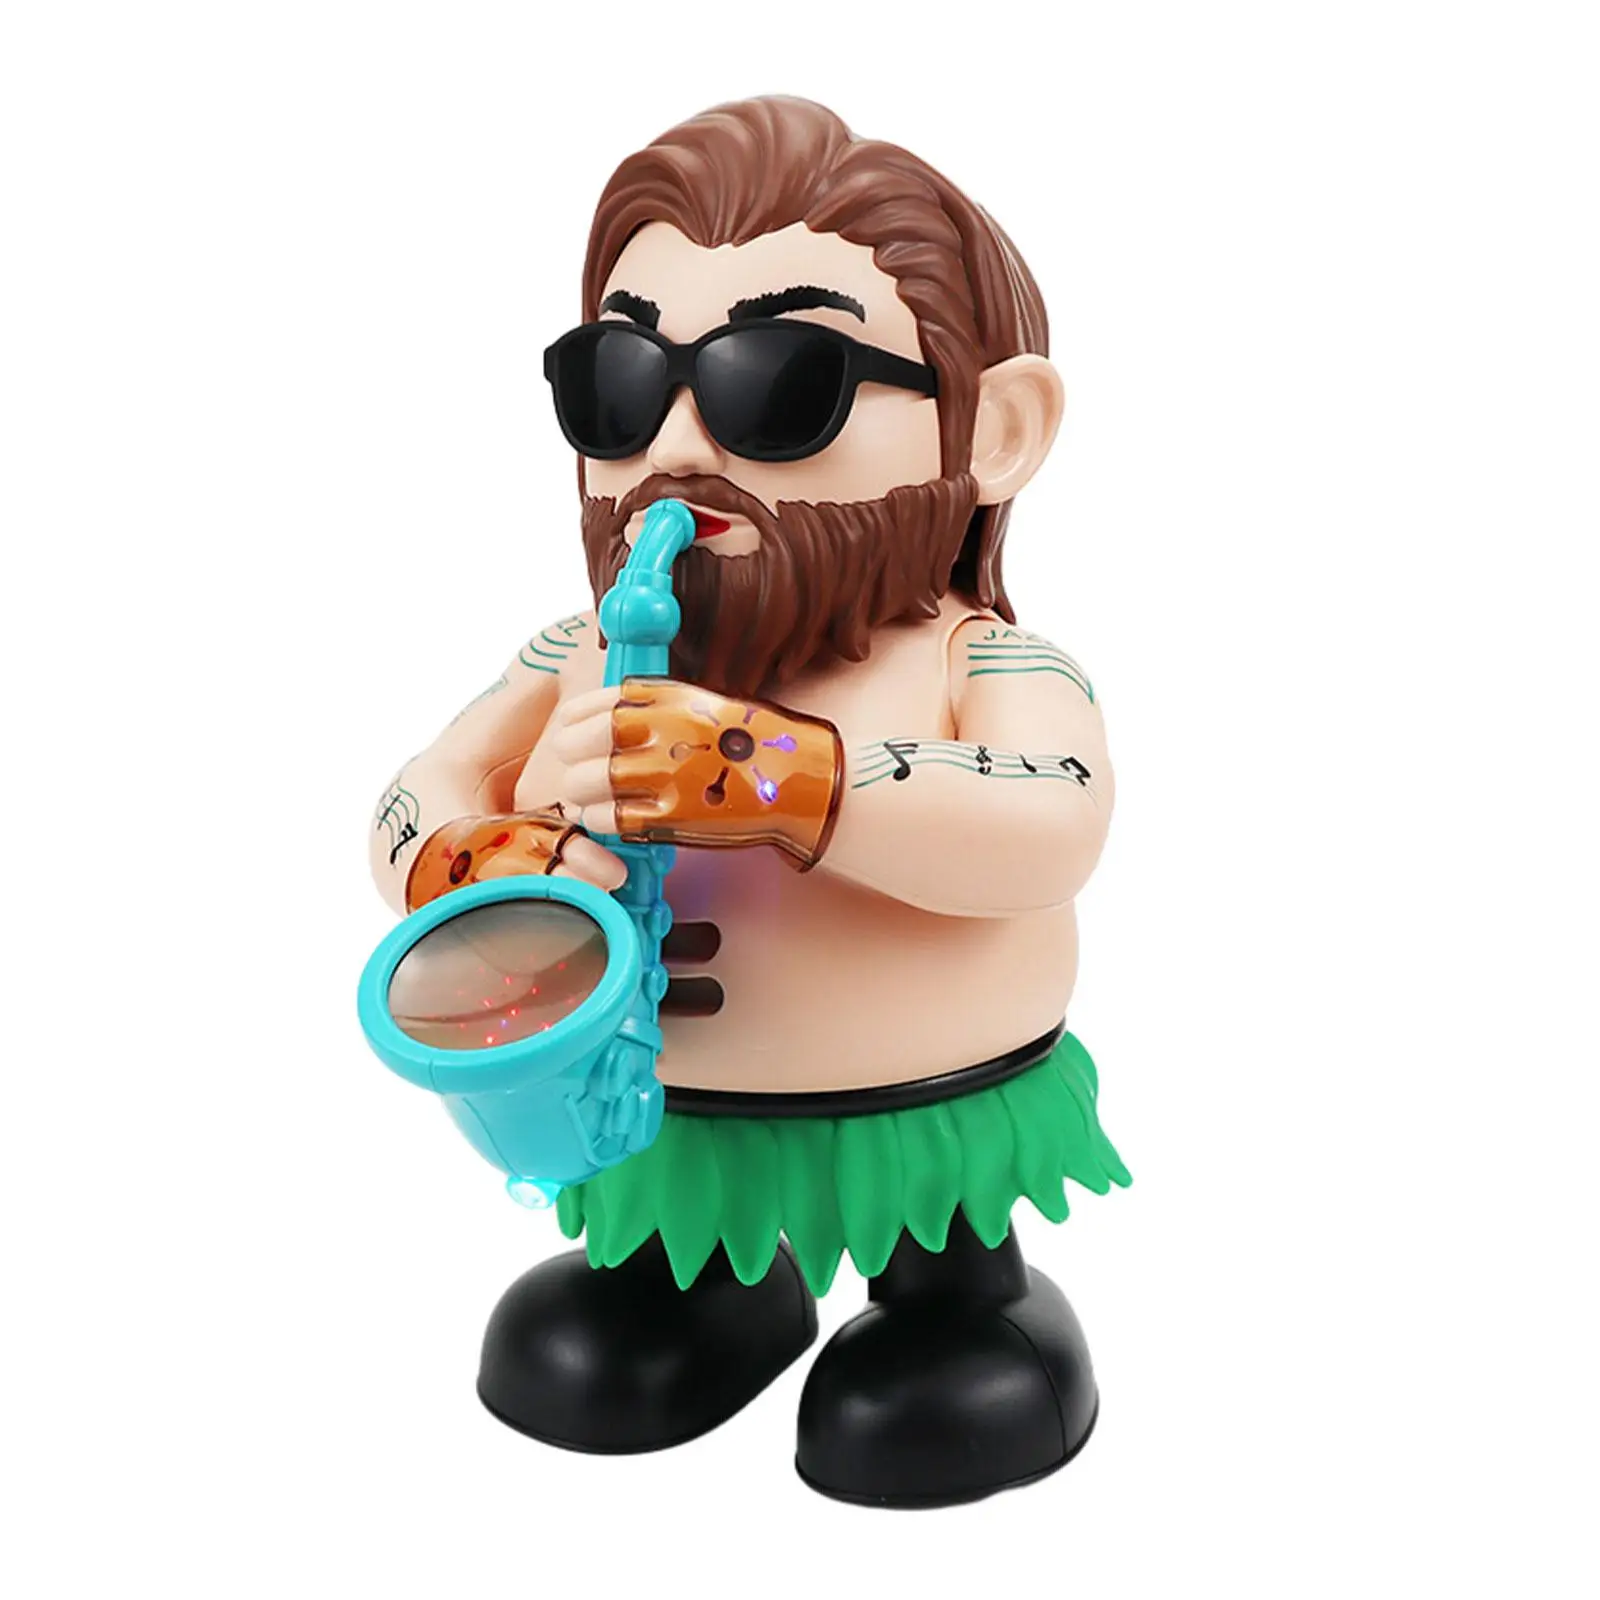 Funny Electric Dancing Saxophonist Toys Electric Doll for Boys Holiday Gifts